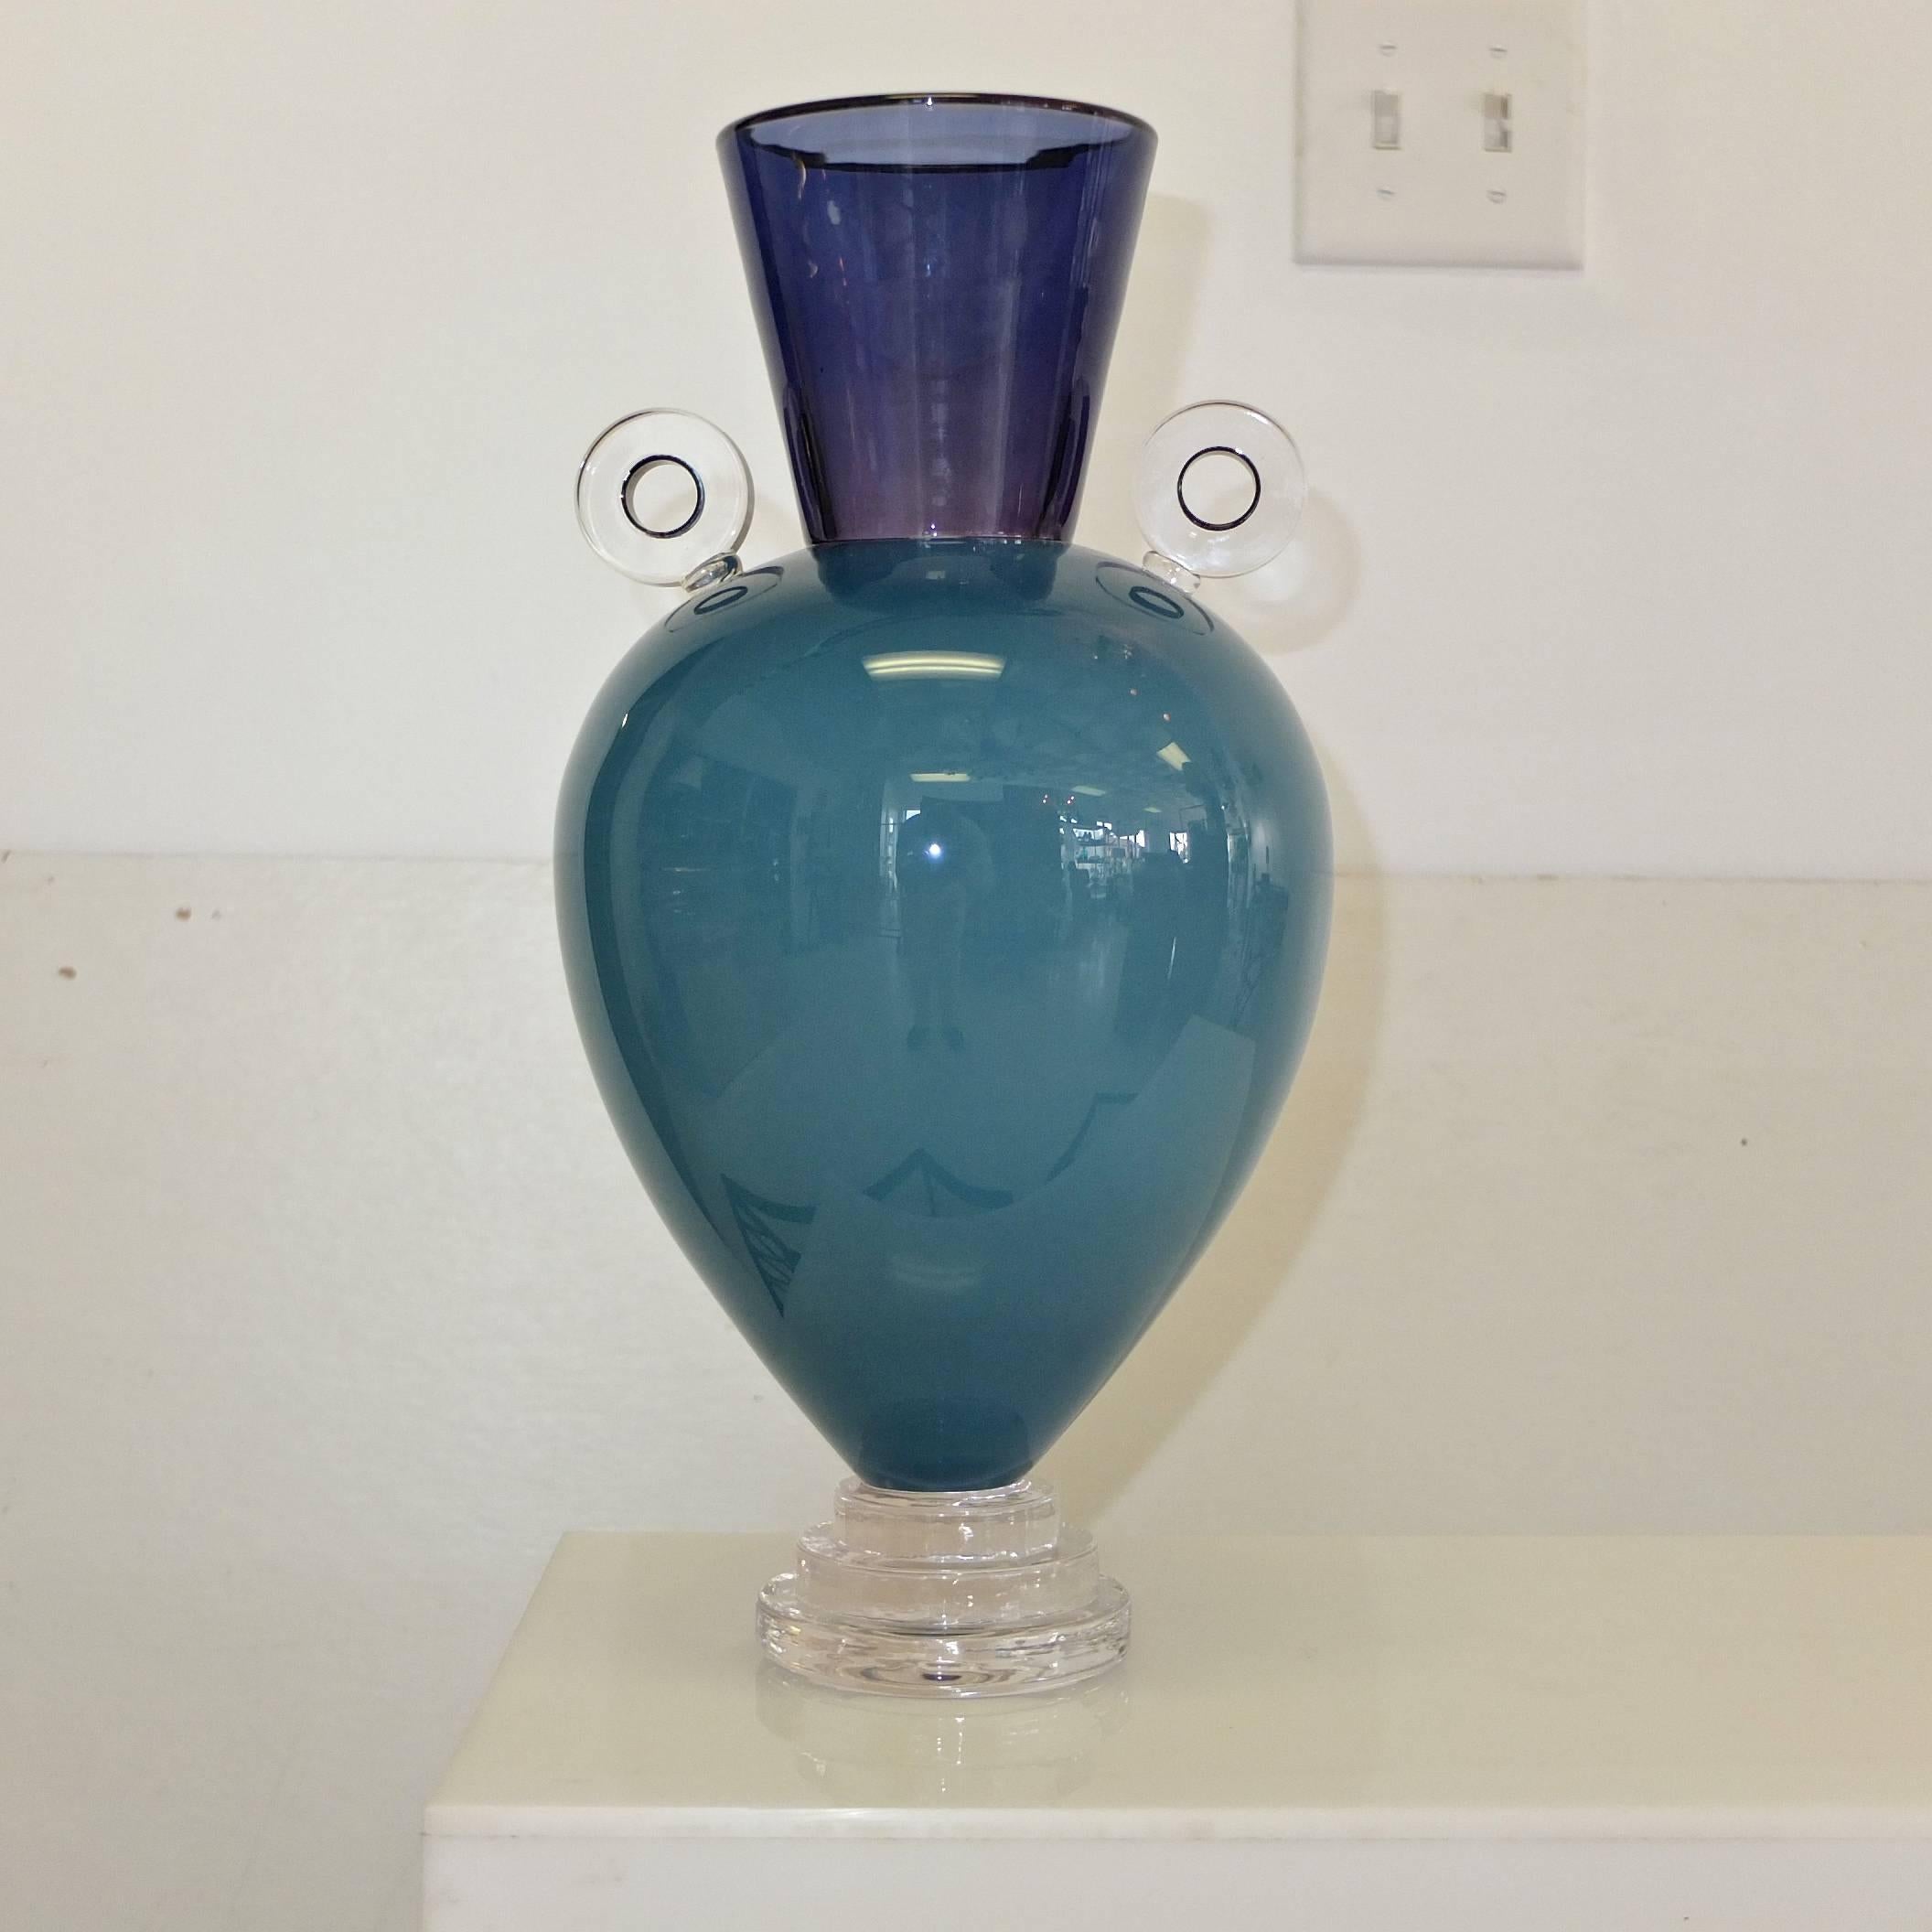 Postmodern studio blown art glass vase (turquoise / teal / violet /clear) signed by Alex Brand, 1990 from his artist in residence glass blowing studio at the Greenbrier resort. 

Alex Brand, who received his BFA from Tyler School of Art in